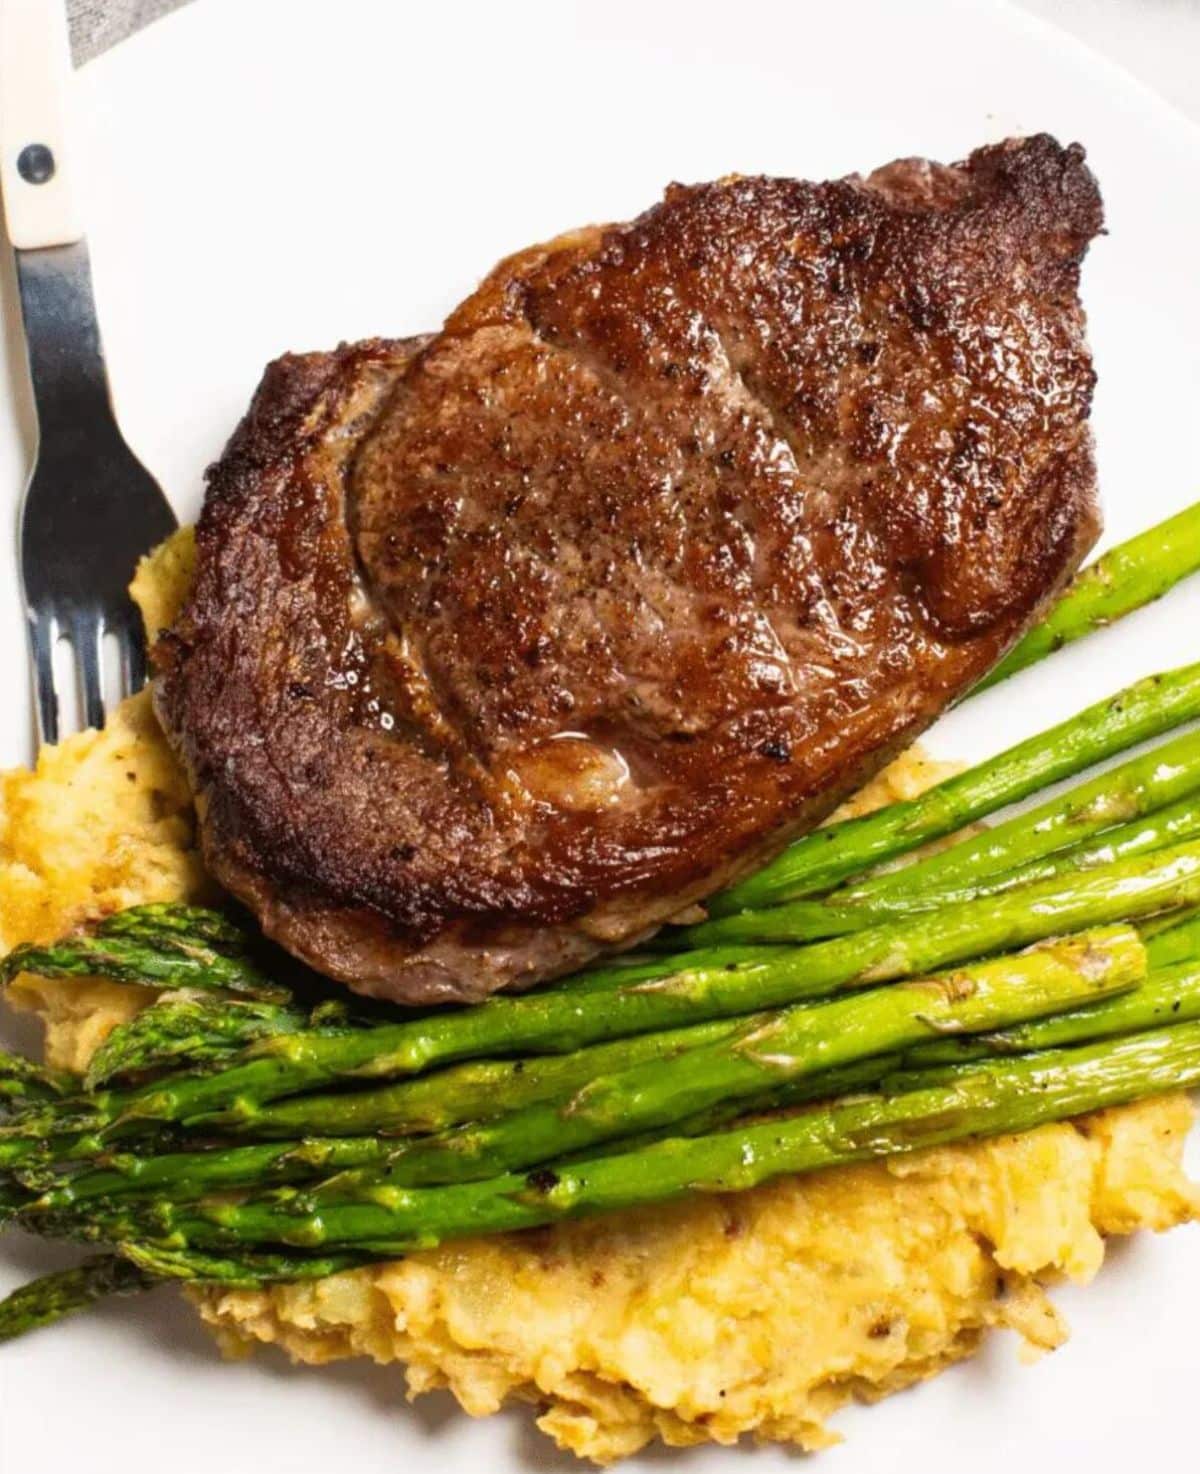 Simple bison ribeye dinner with mashed potatoes and asparagus on a white plate with a fork.